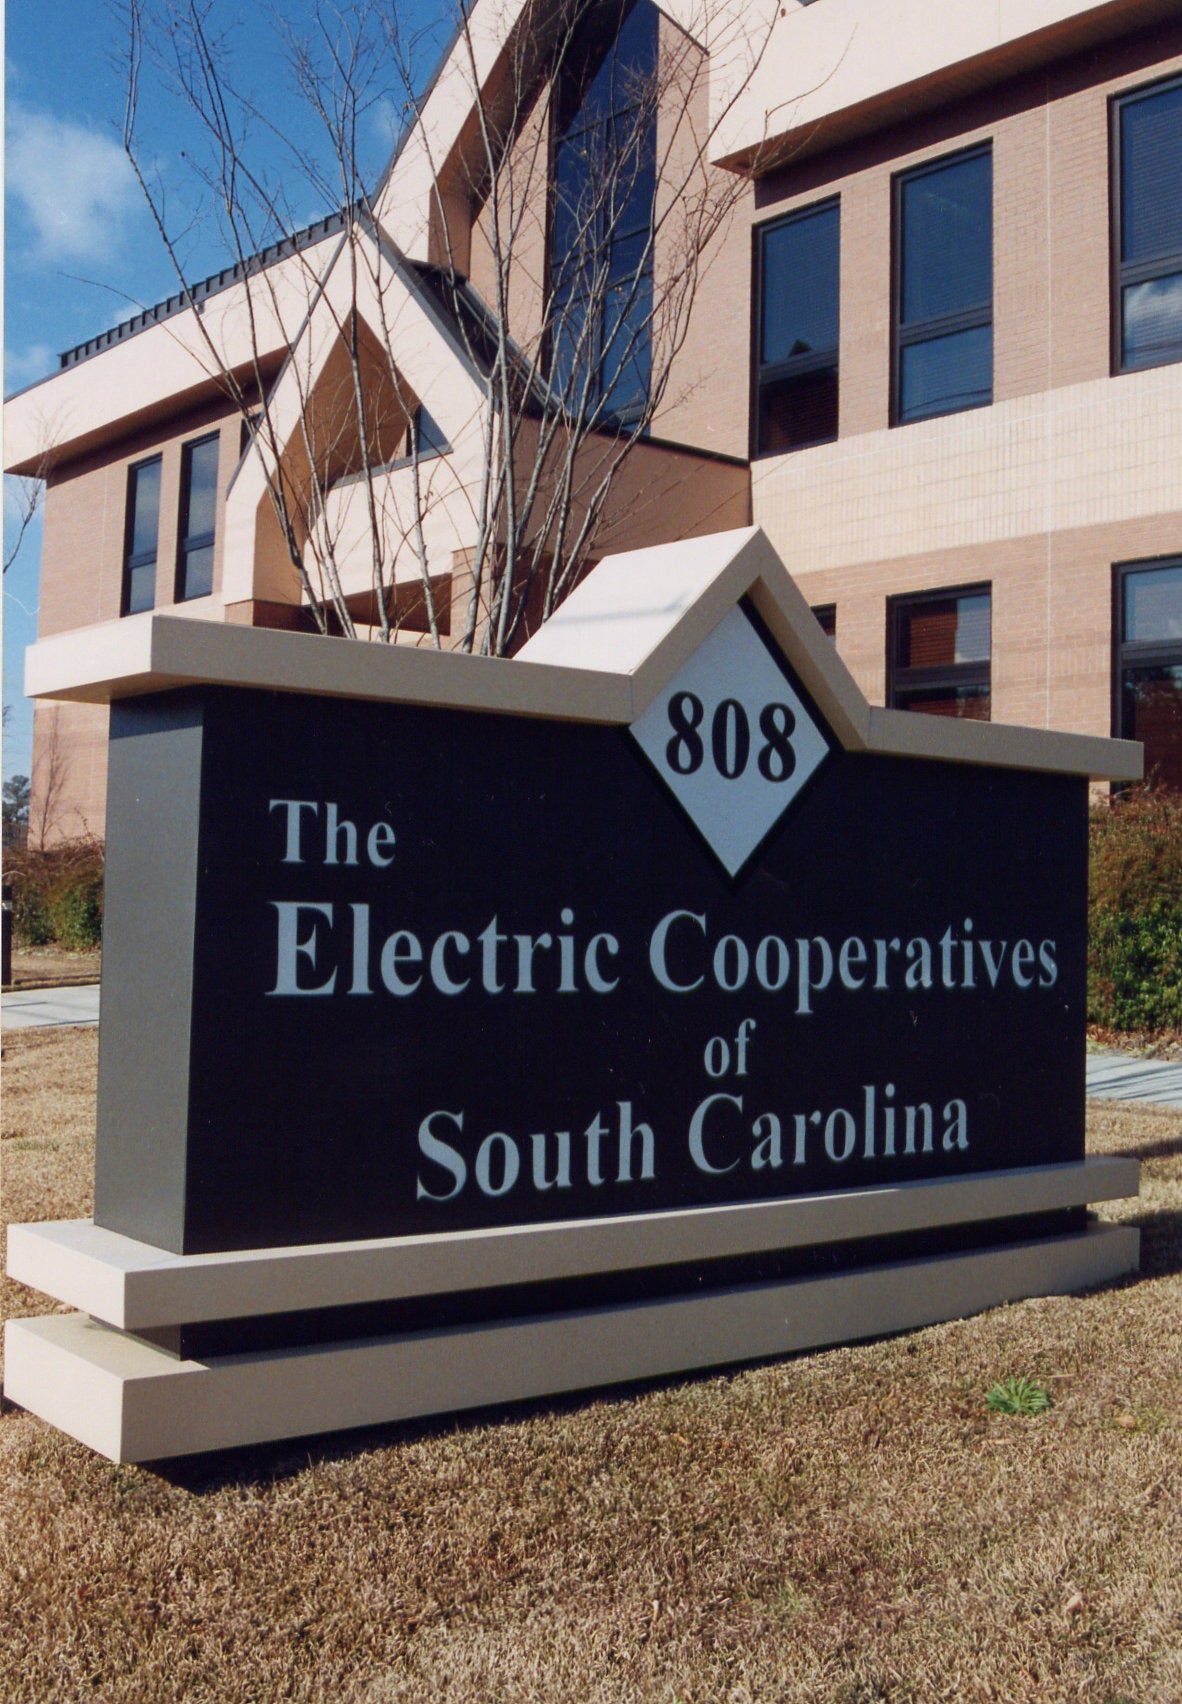 The Electric Cooperatives of South Carolina building in Cayce